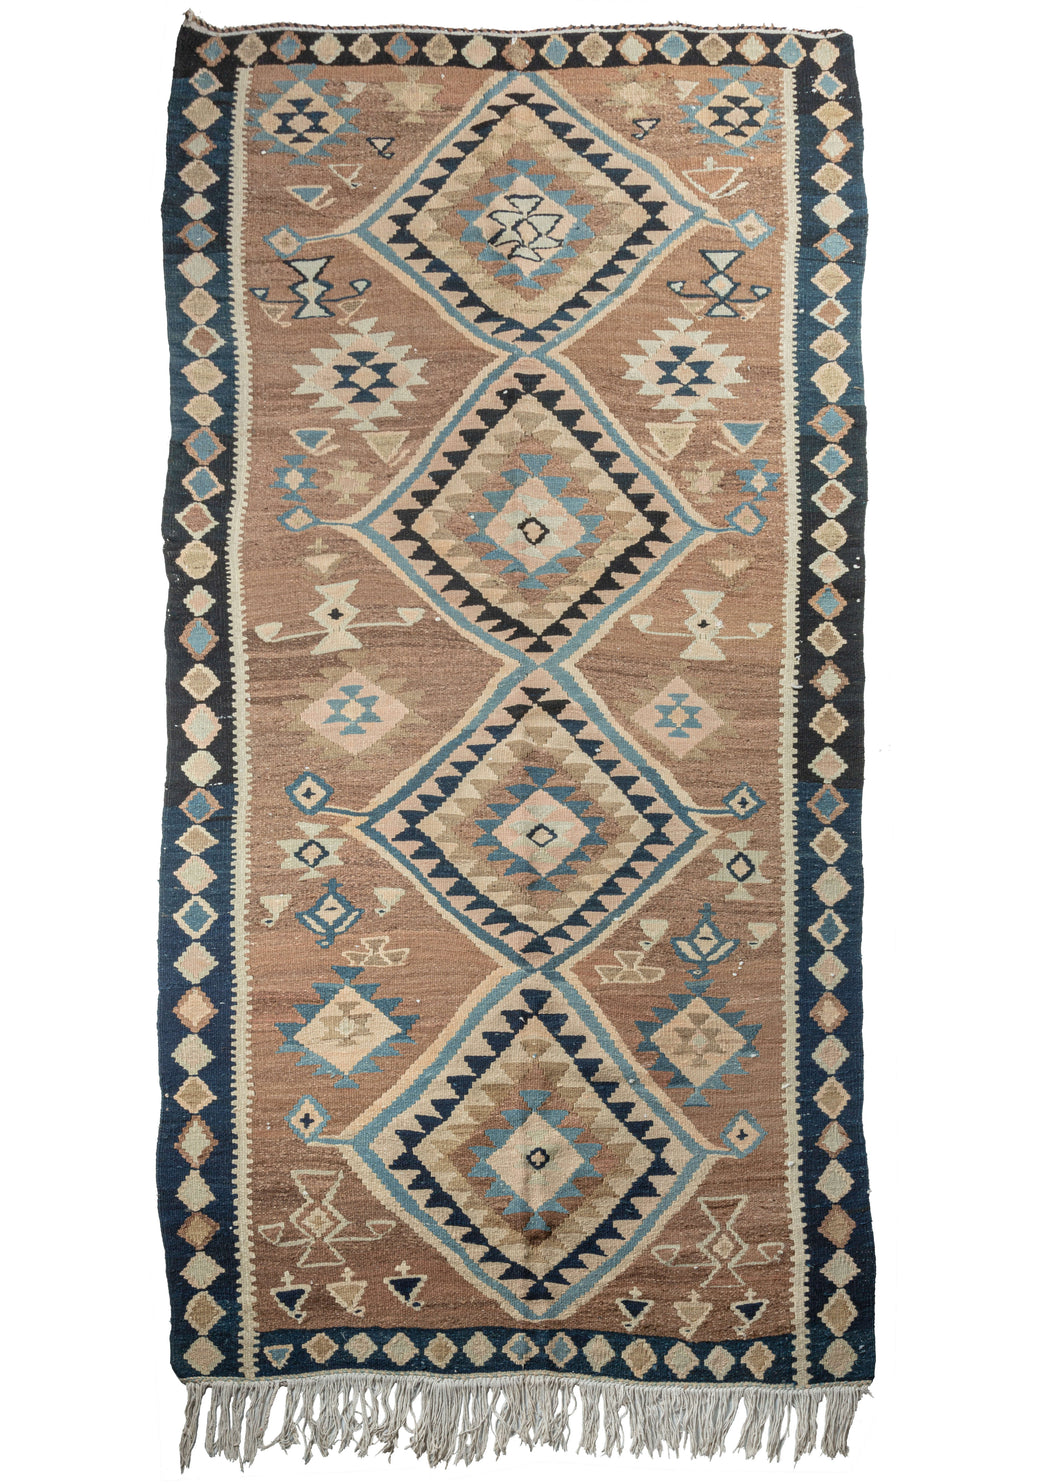 Mid century south Persian Shiraz kelleghi runner kilim featuring a design of four vertical diamonds, with concentric zig-zag lines. Shapes and symbols fill in the negative space on the camel field. The border continues the diamond motif with small diamonds in shades of brown on a deep blue ground. 